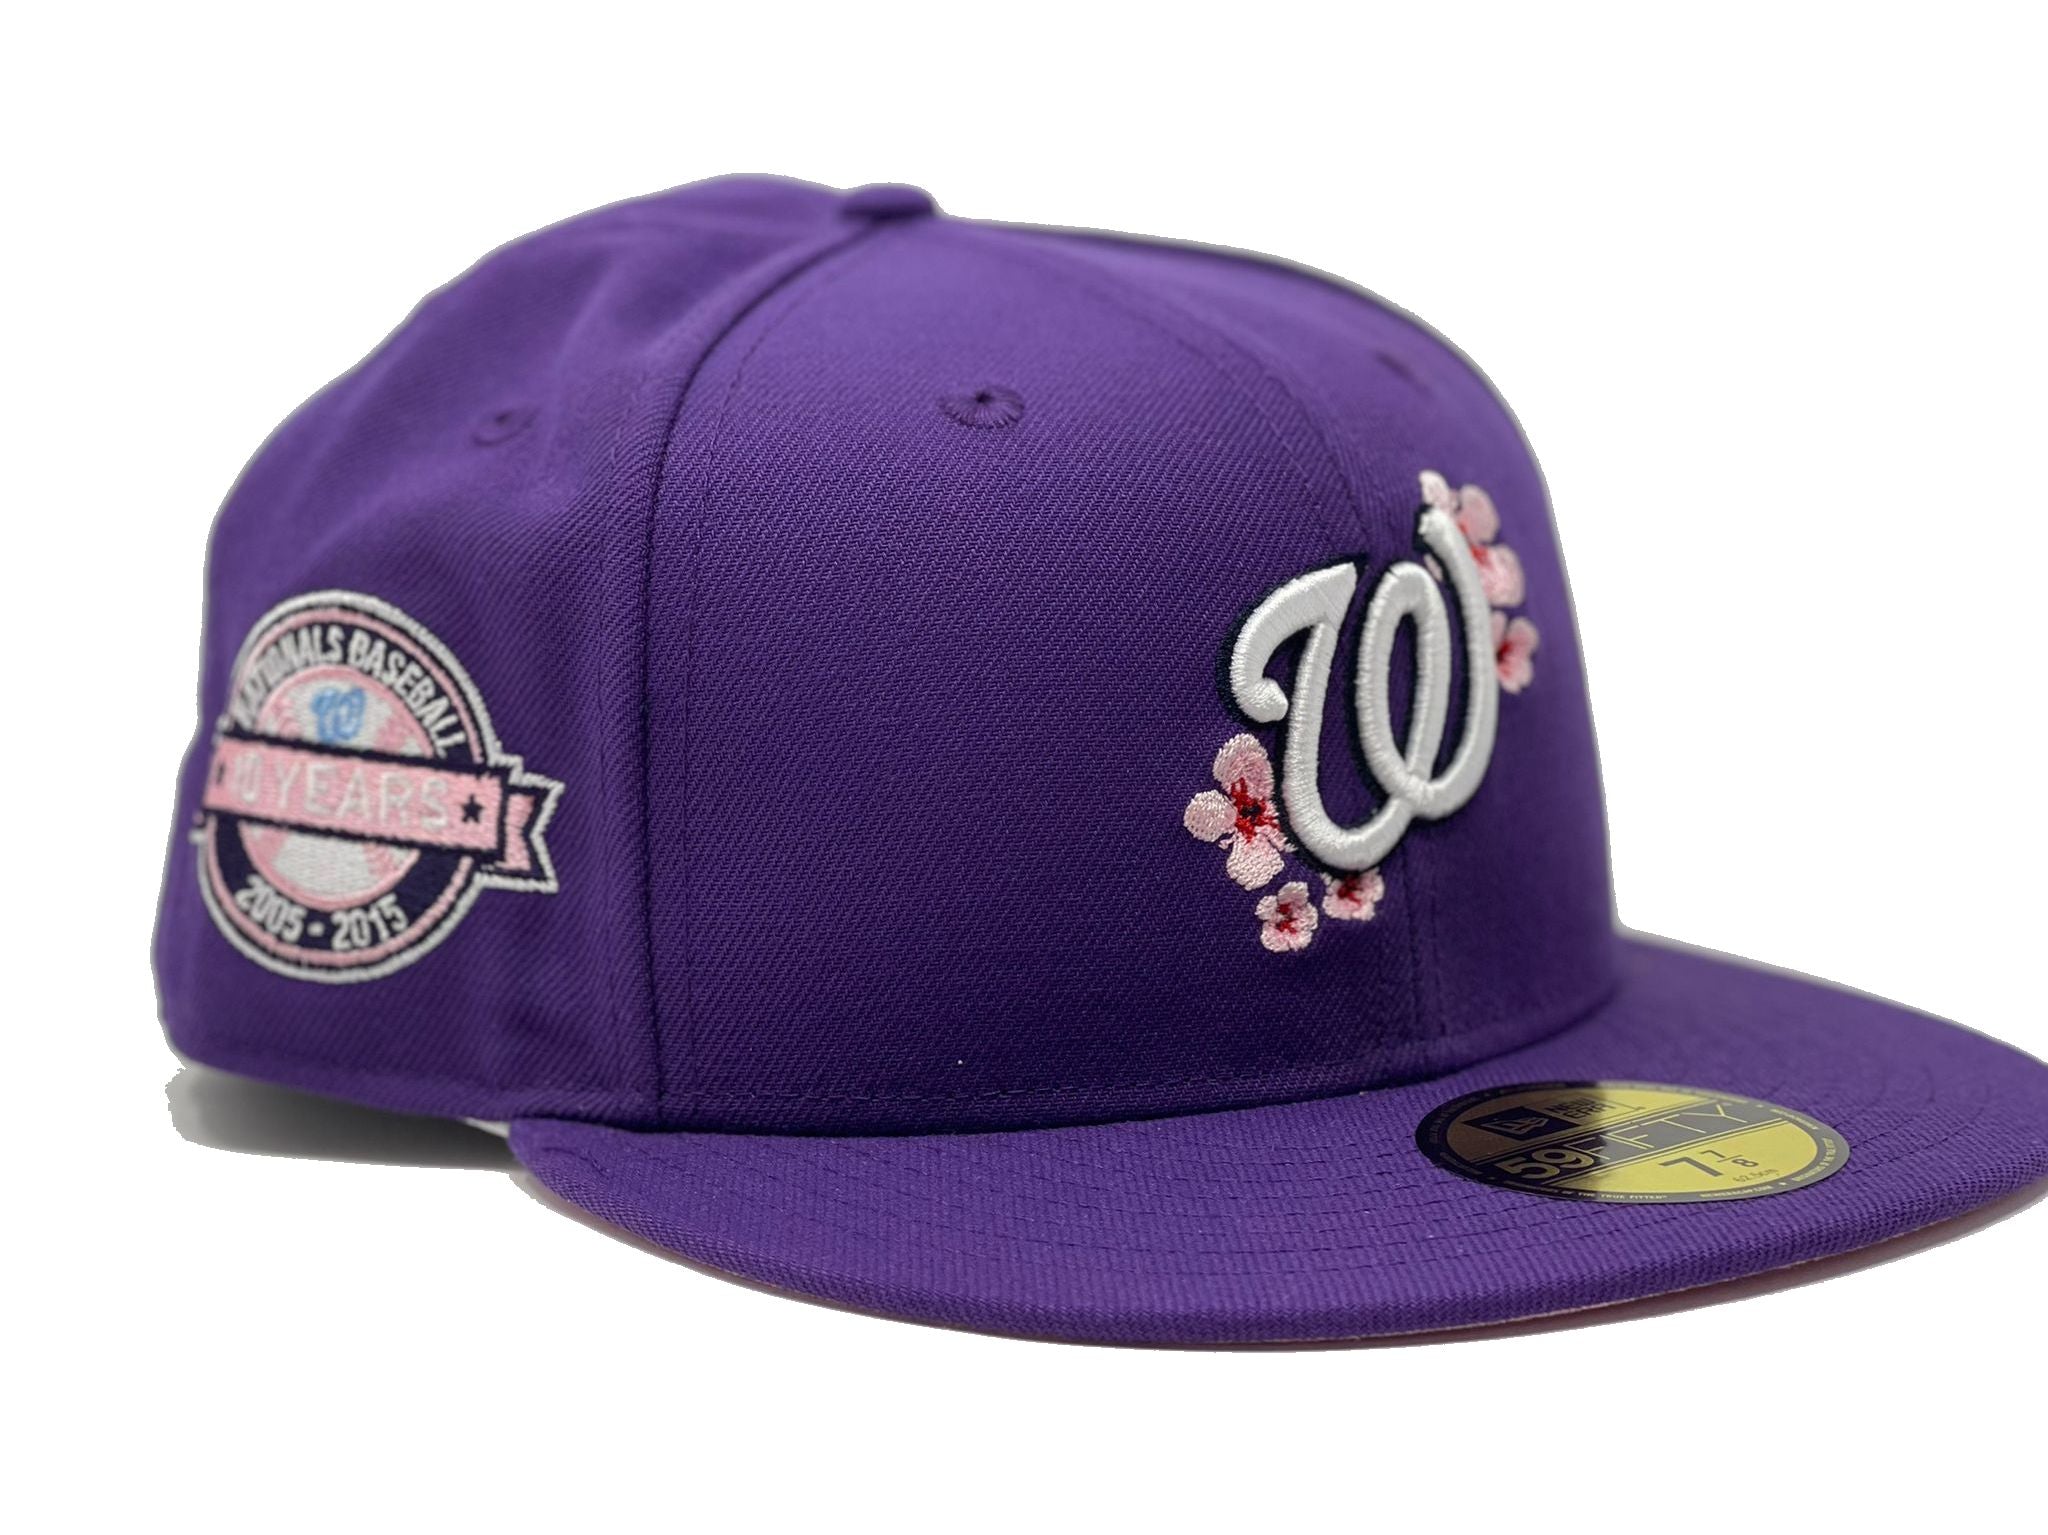 Cherry Blossom Fitted Hats By Sports World 165